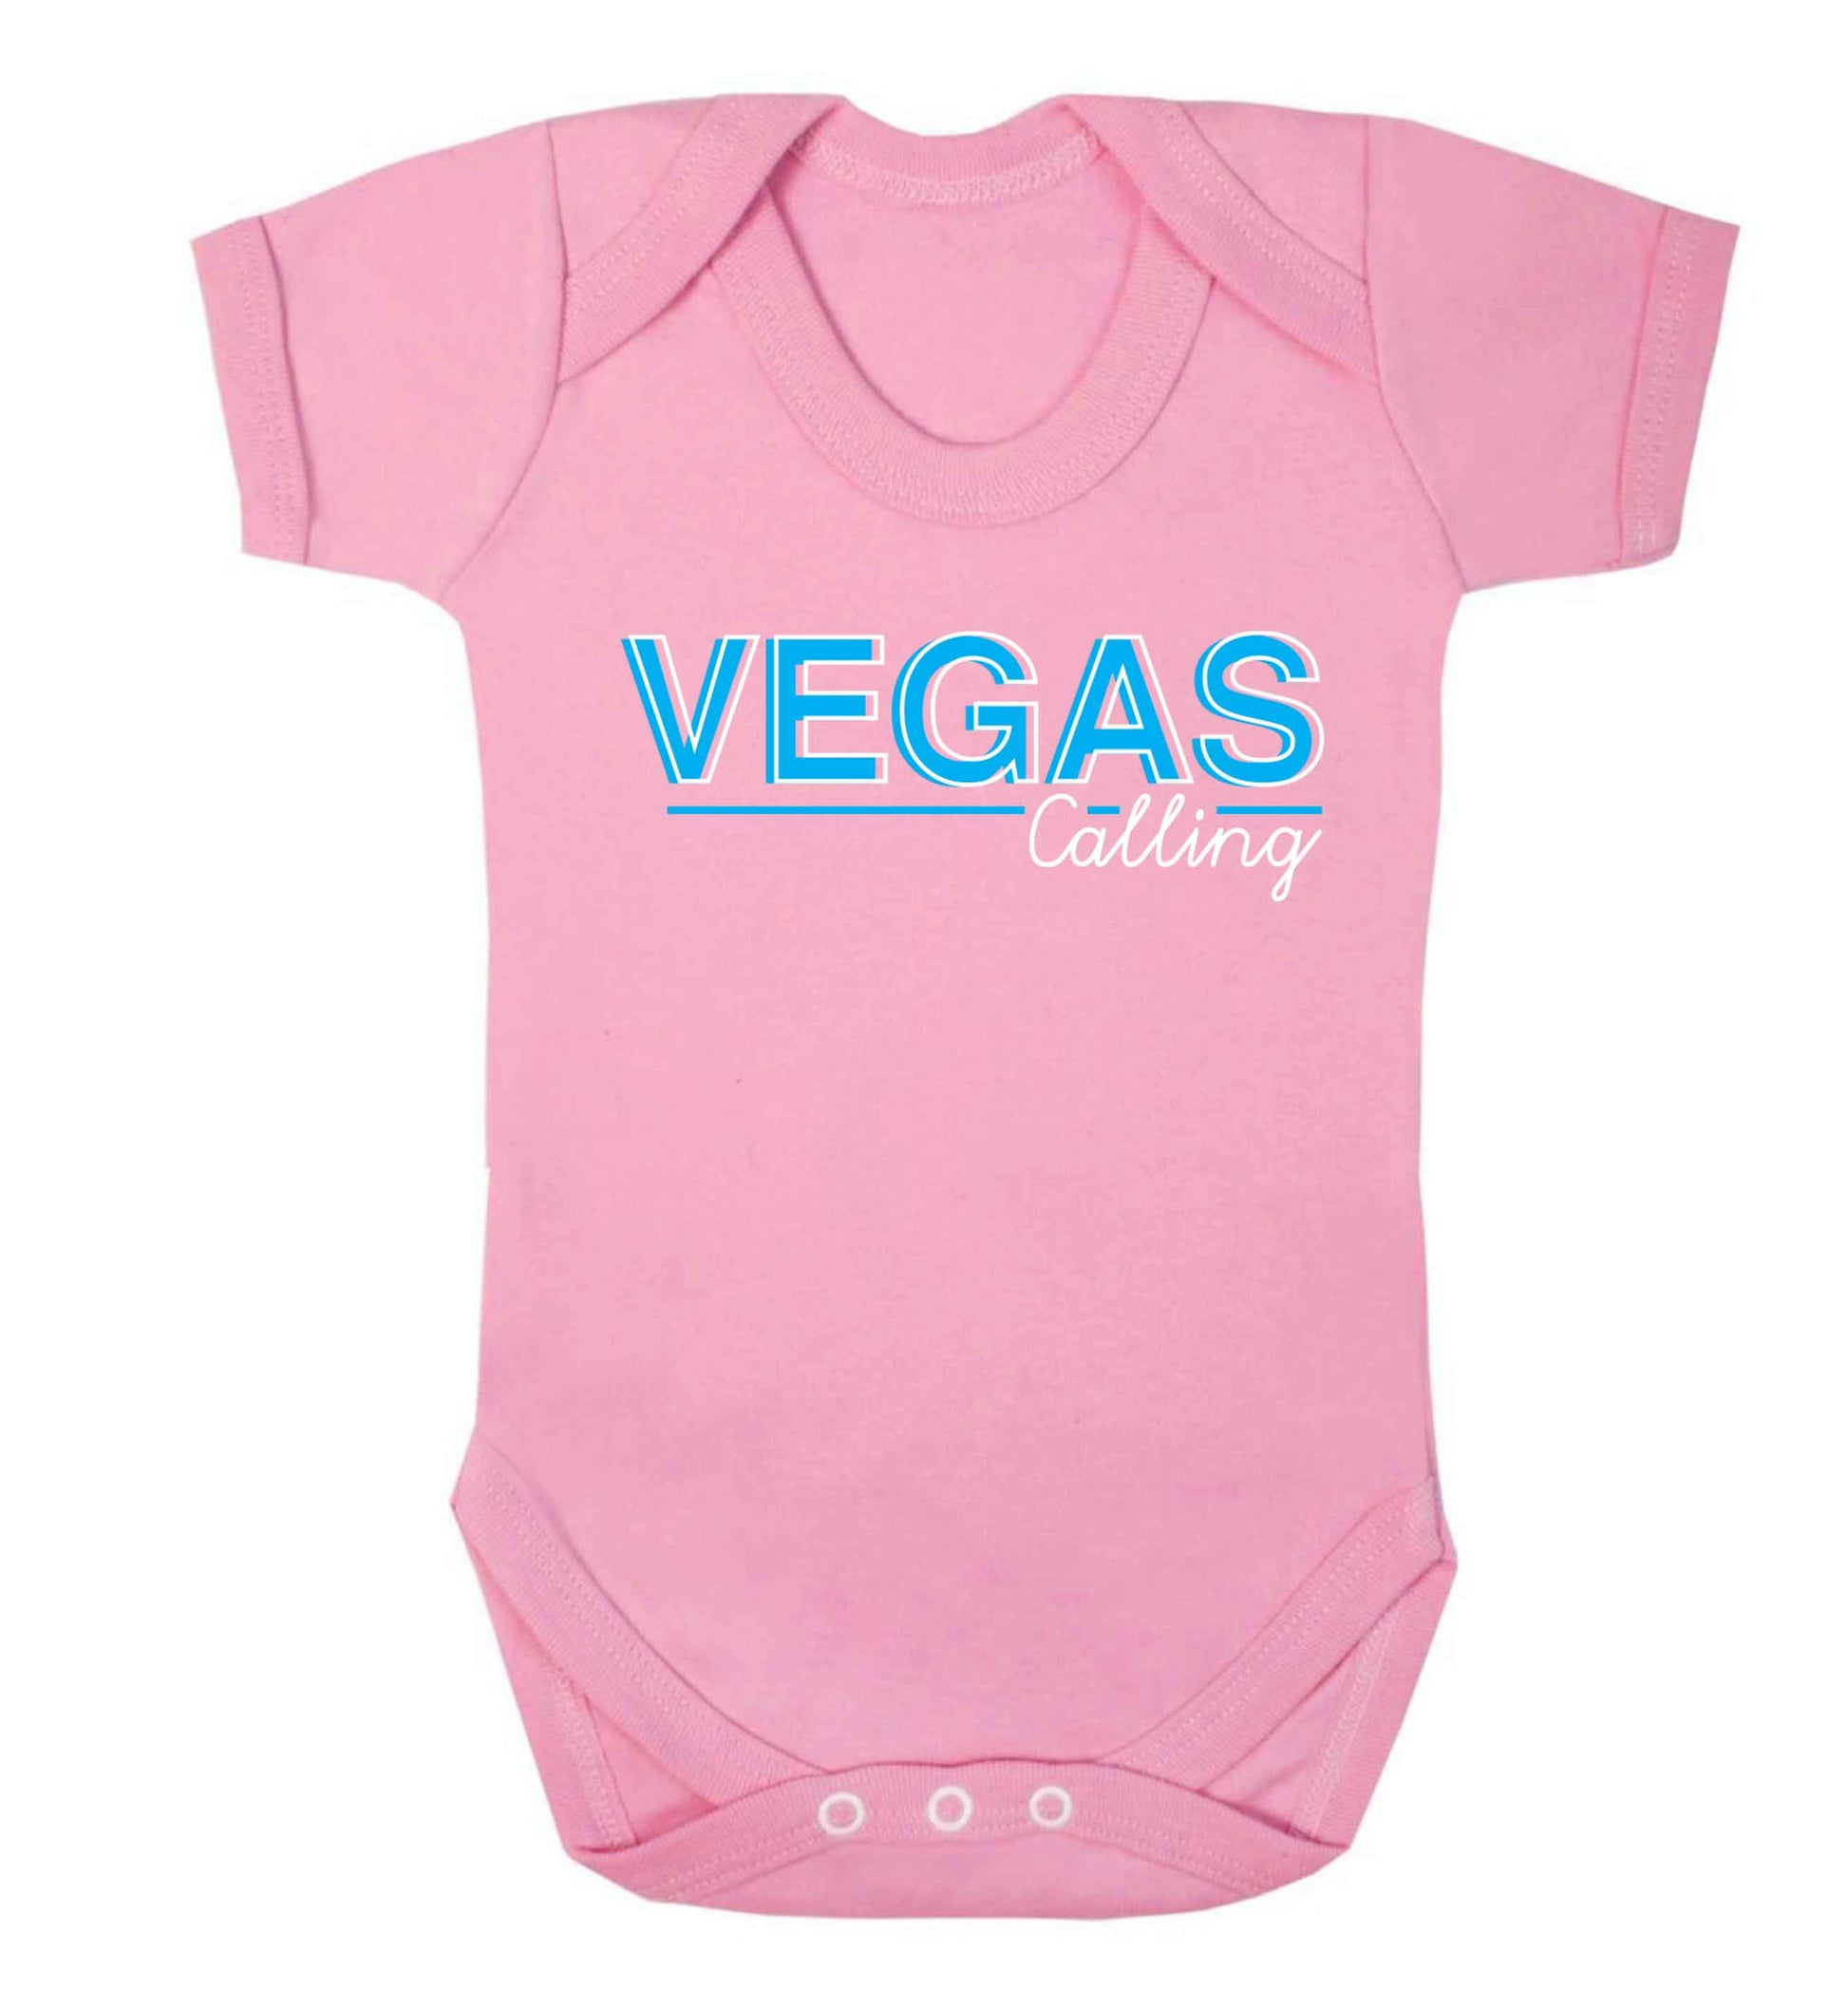 Vegas calling Baby Vest pale pink 18-24 months